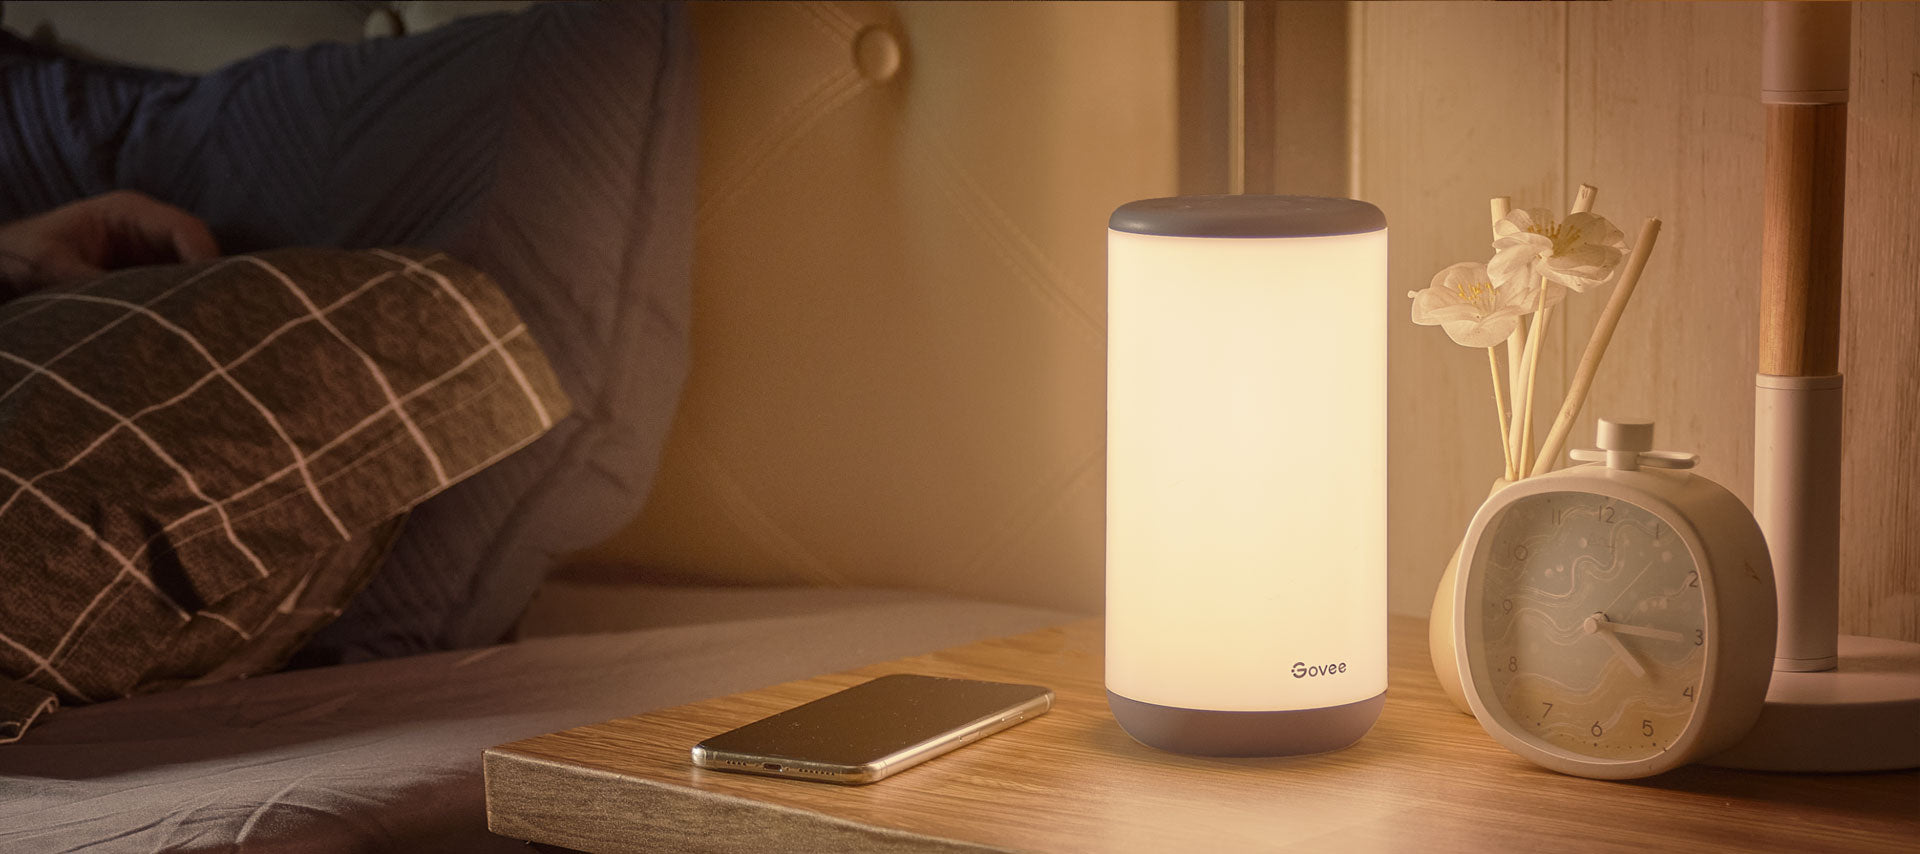 Govee Aura Smart Table Lamp with Pre-set Timer